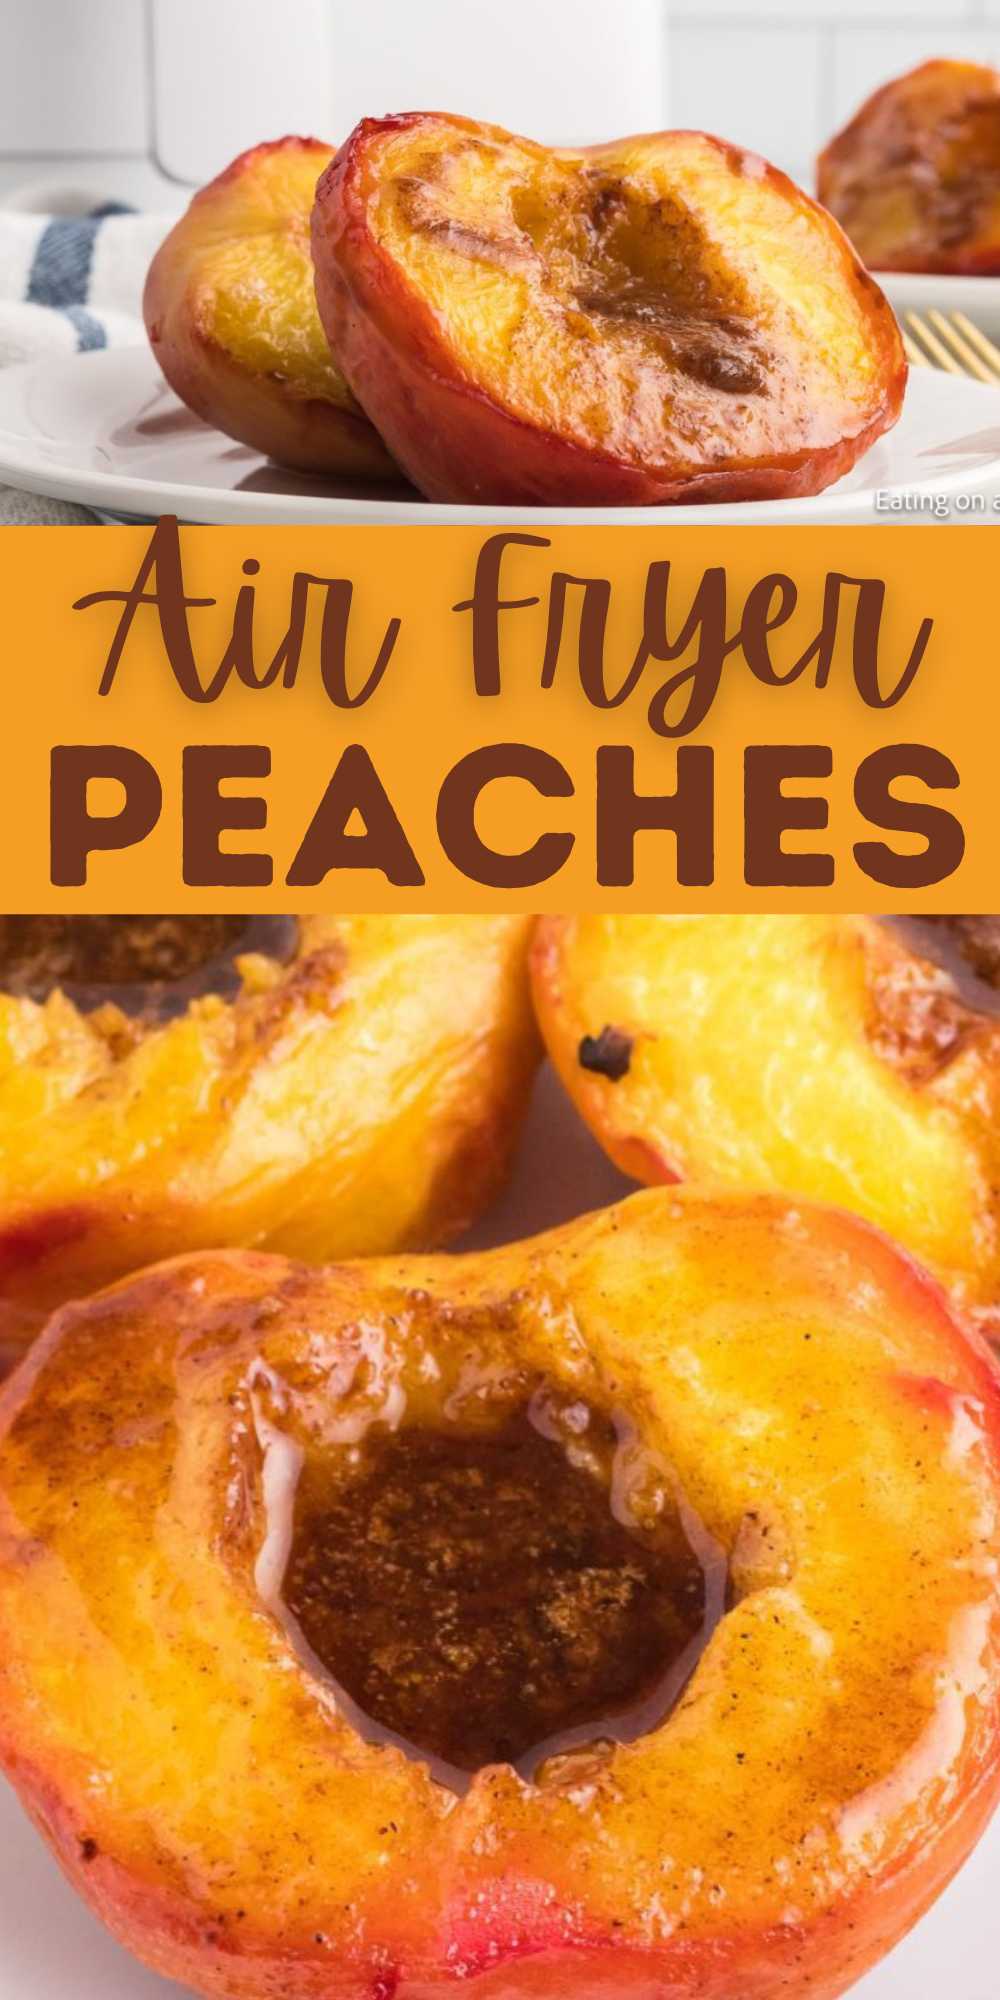 Air Fryer Peaches is the perfect recipe if you want something sweet and have a fresh peach. Simple dessert recipe to make in the Air Fryer. You will love how sweet and tender they are and they can even be served with many toppings. Whether you need an individual dessert or to feed a crowd, make these Air Fryer Peaches! #eatingonadime #airfryerpeaches #airfryerrecipe